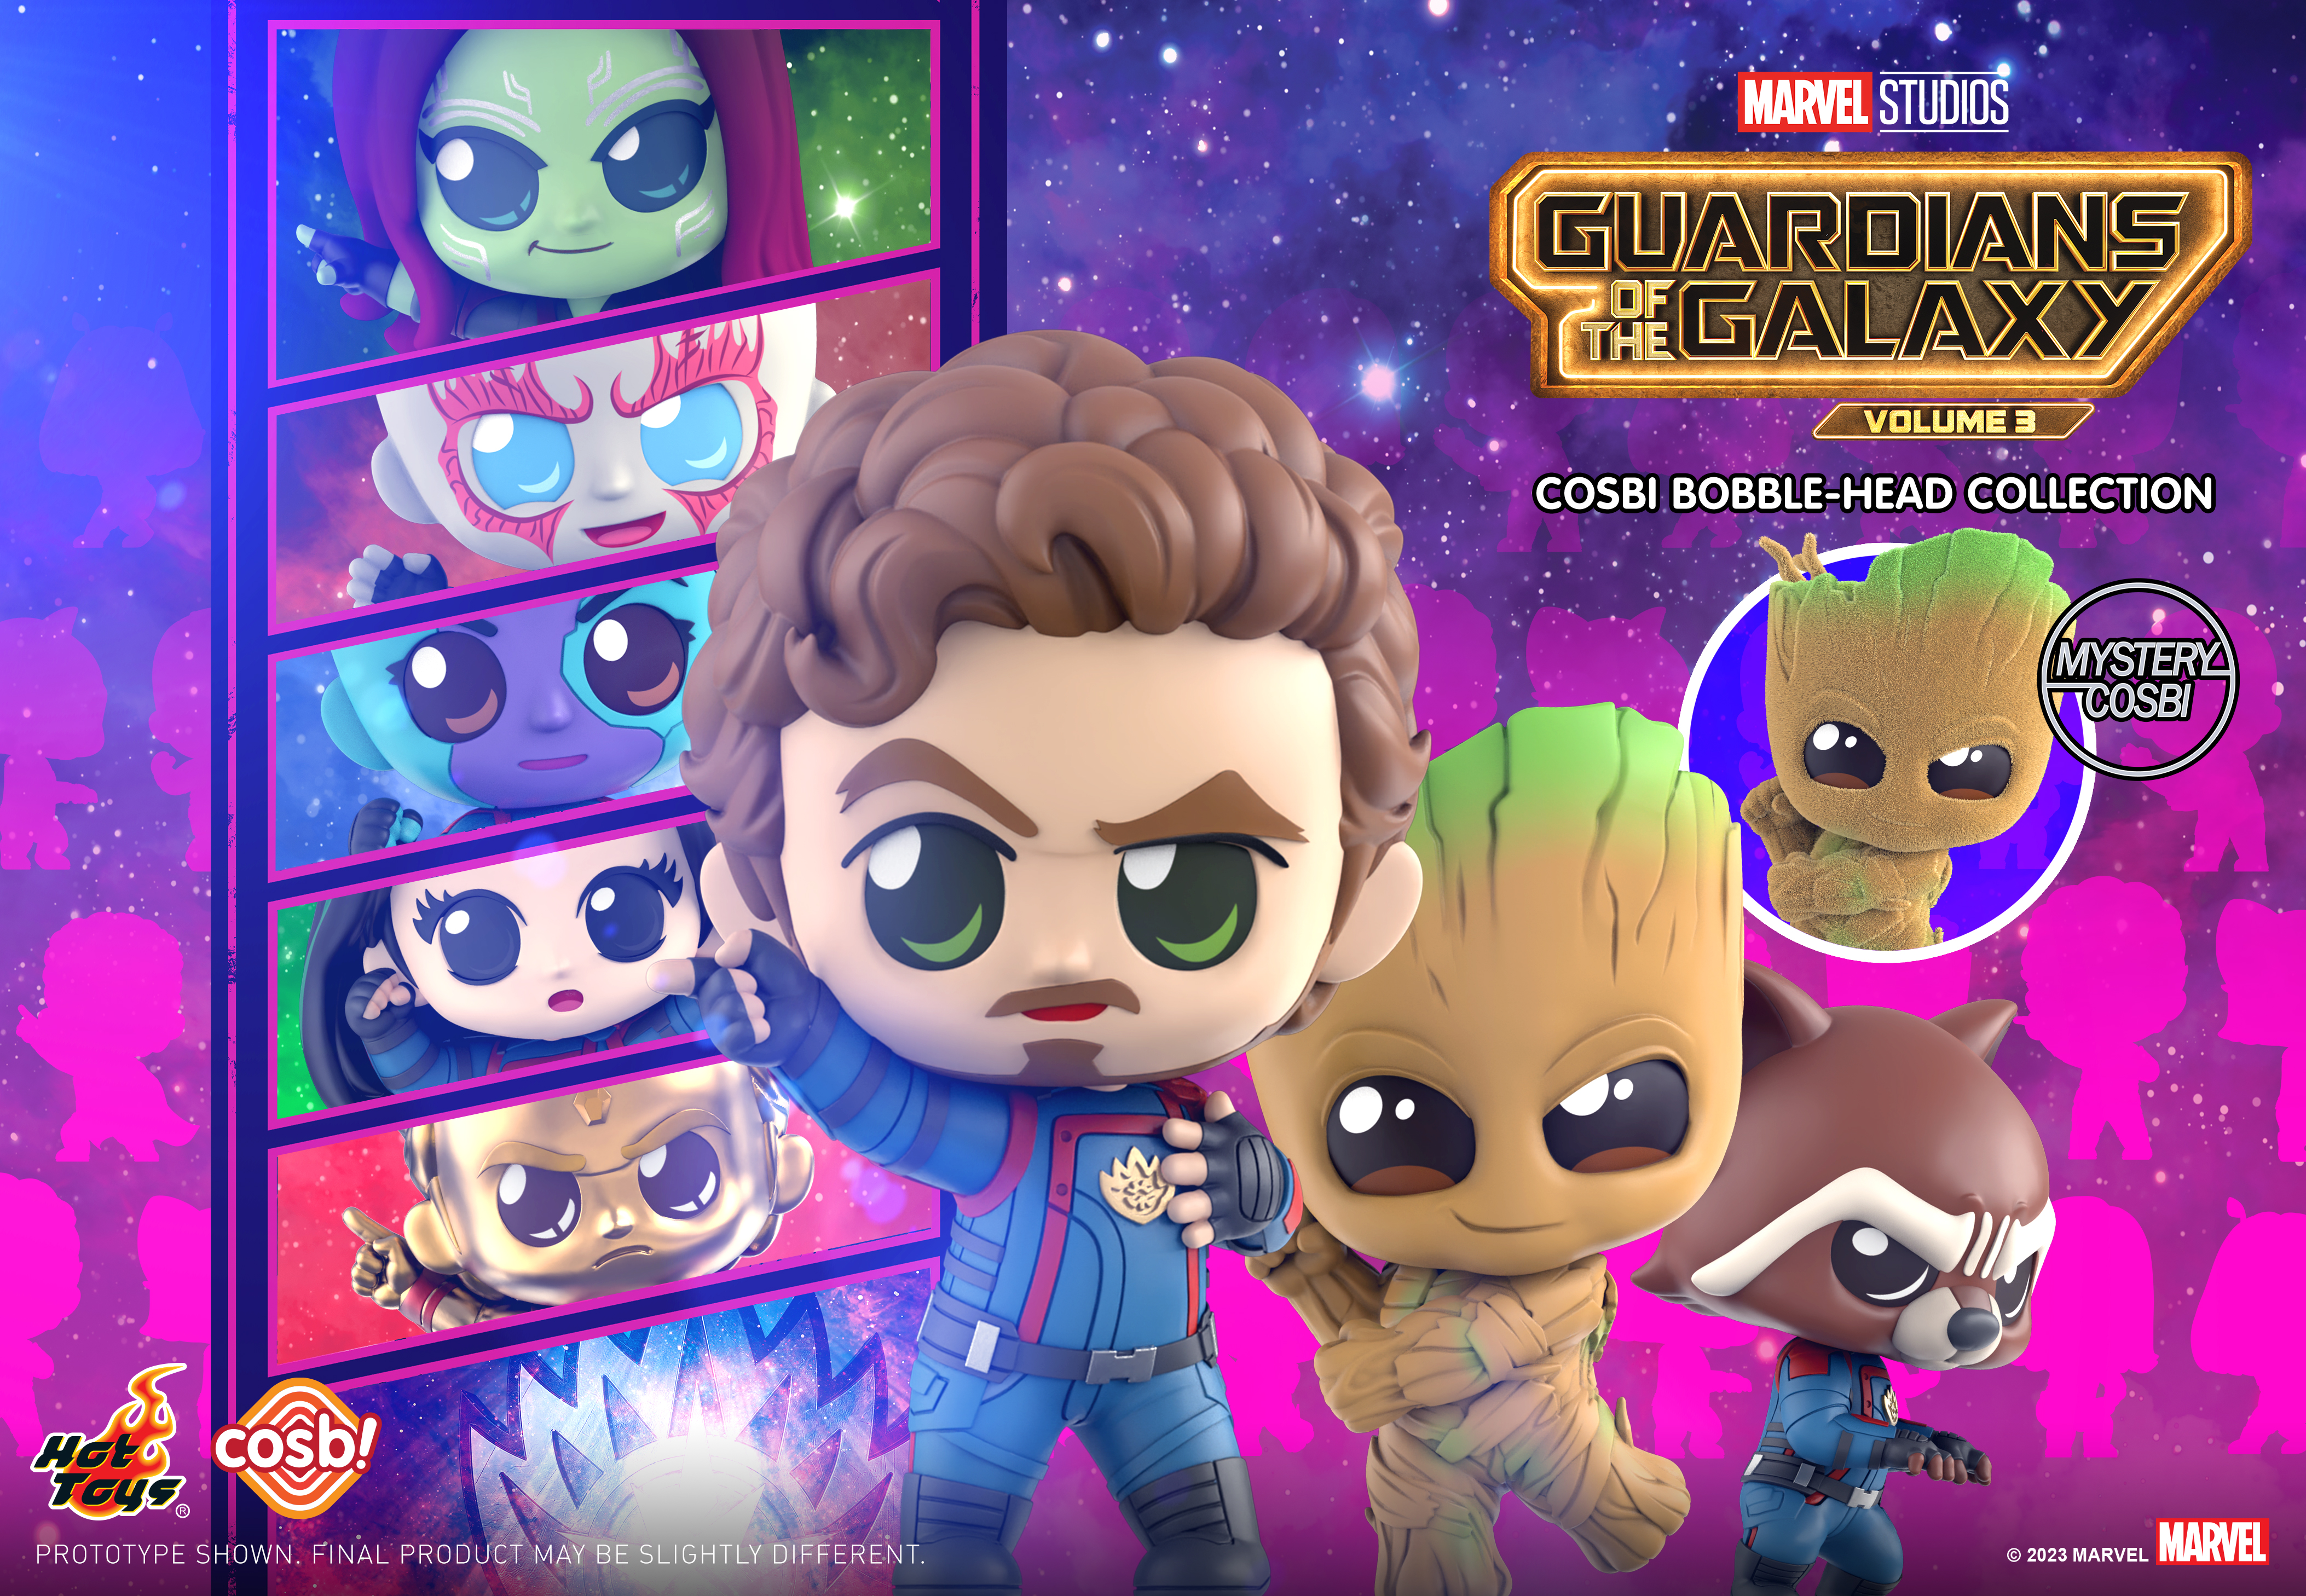 Hot Toys - Guardians of the Galaxy vol 3 Cosbi